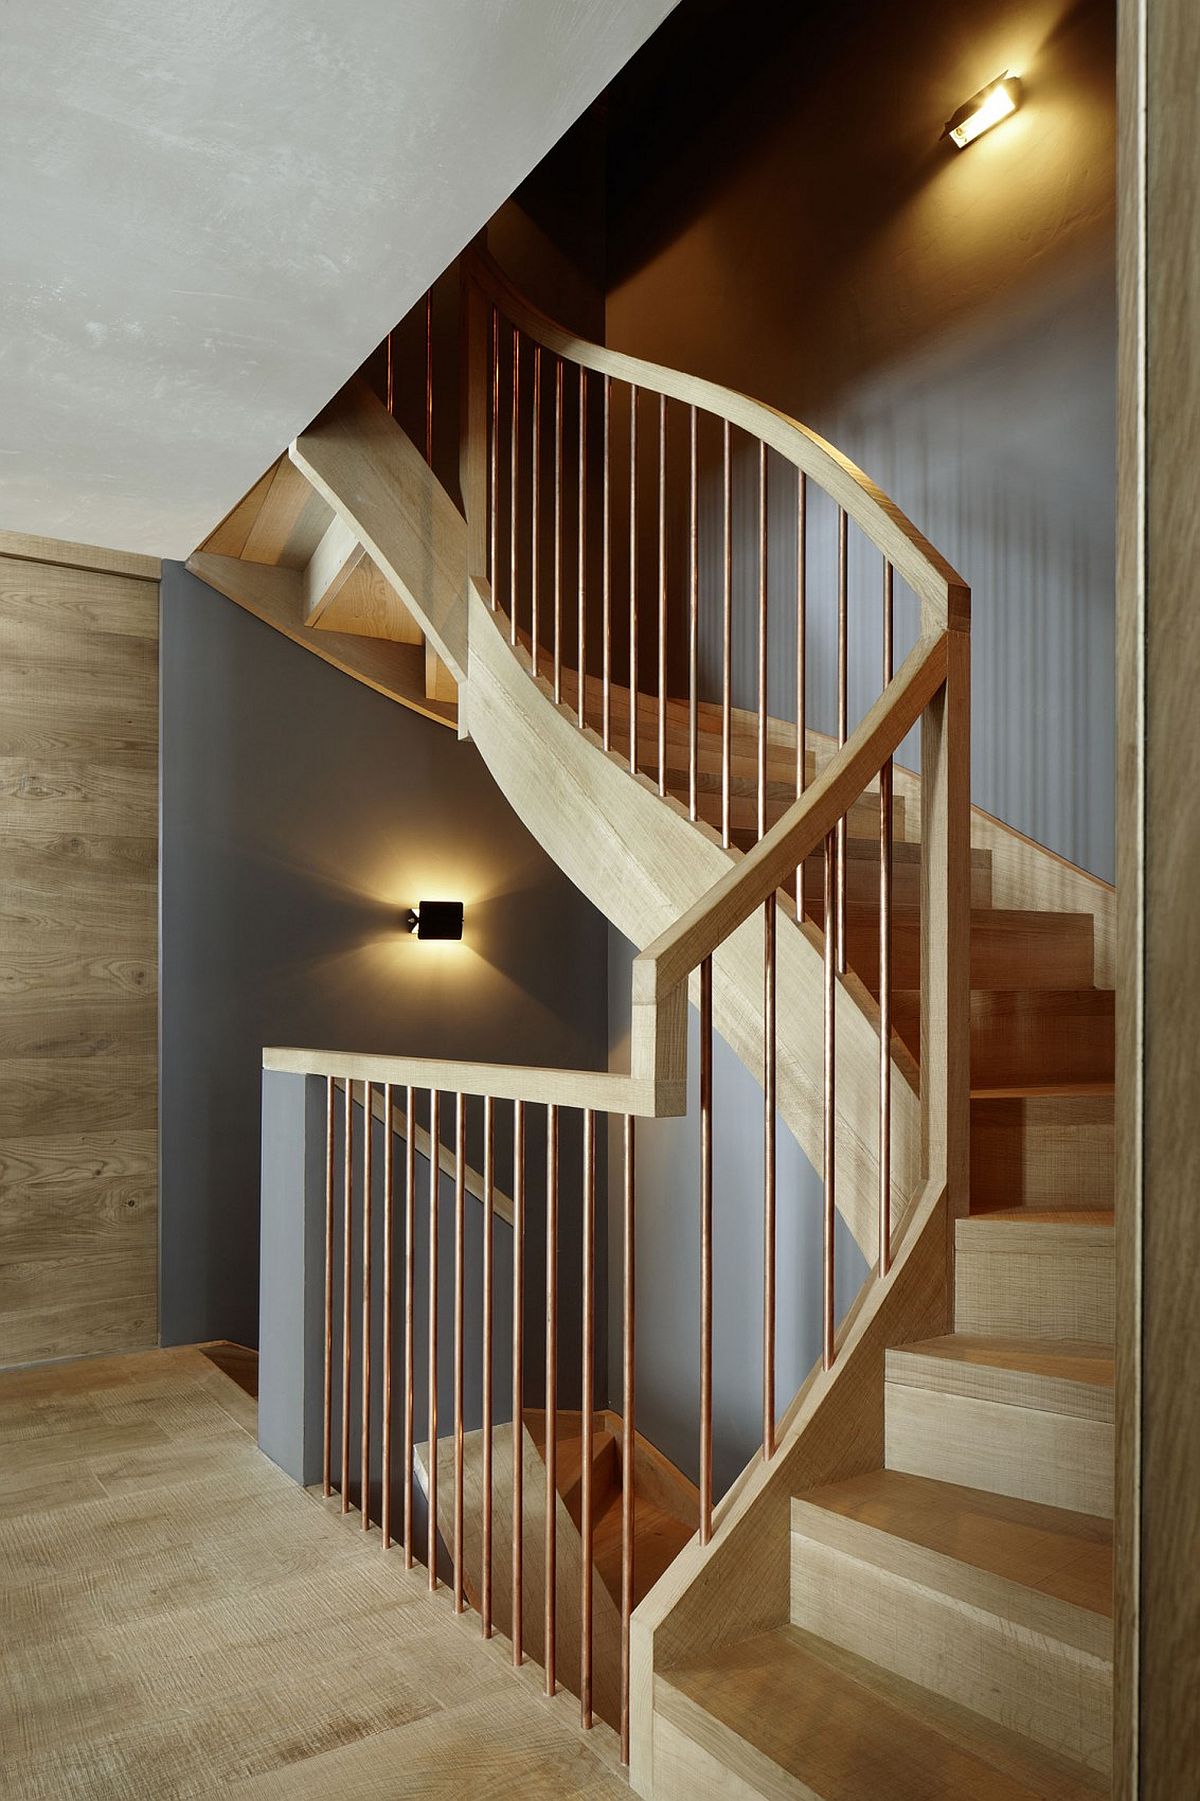 Sculptural staircase in oak with wooden handrail and copper railing